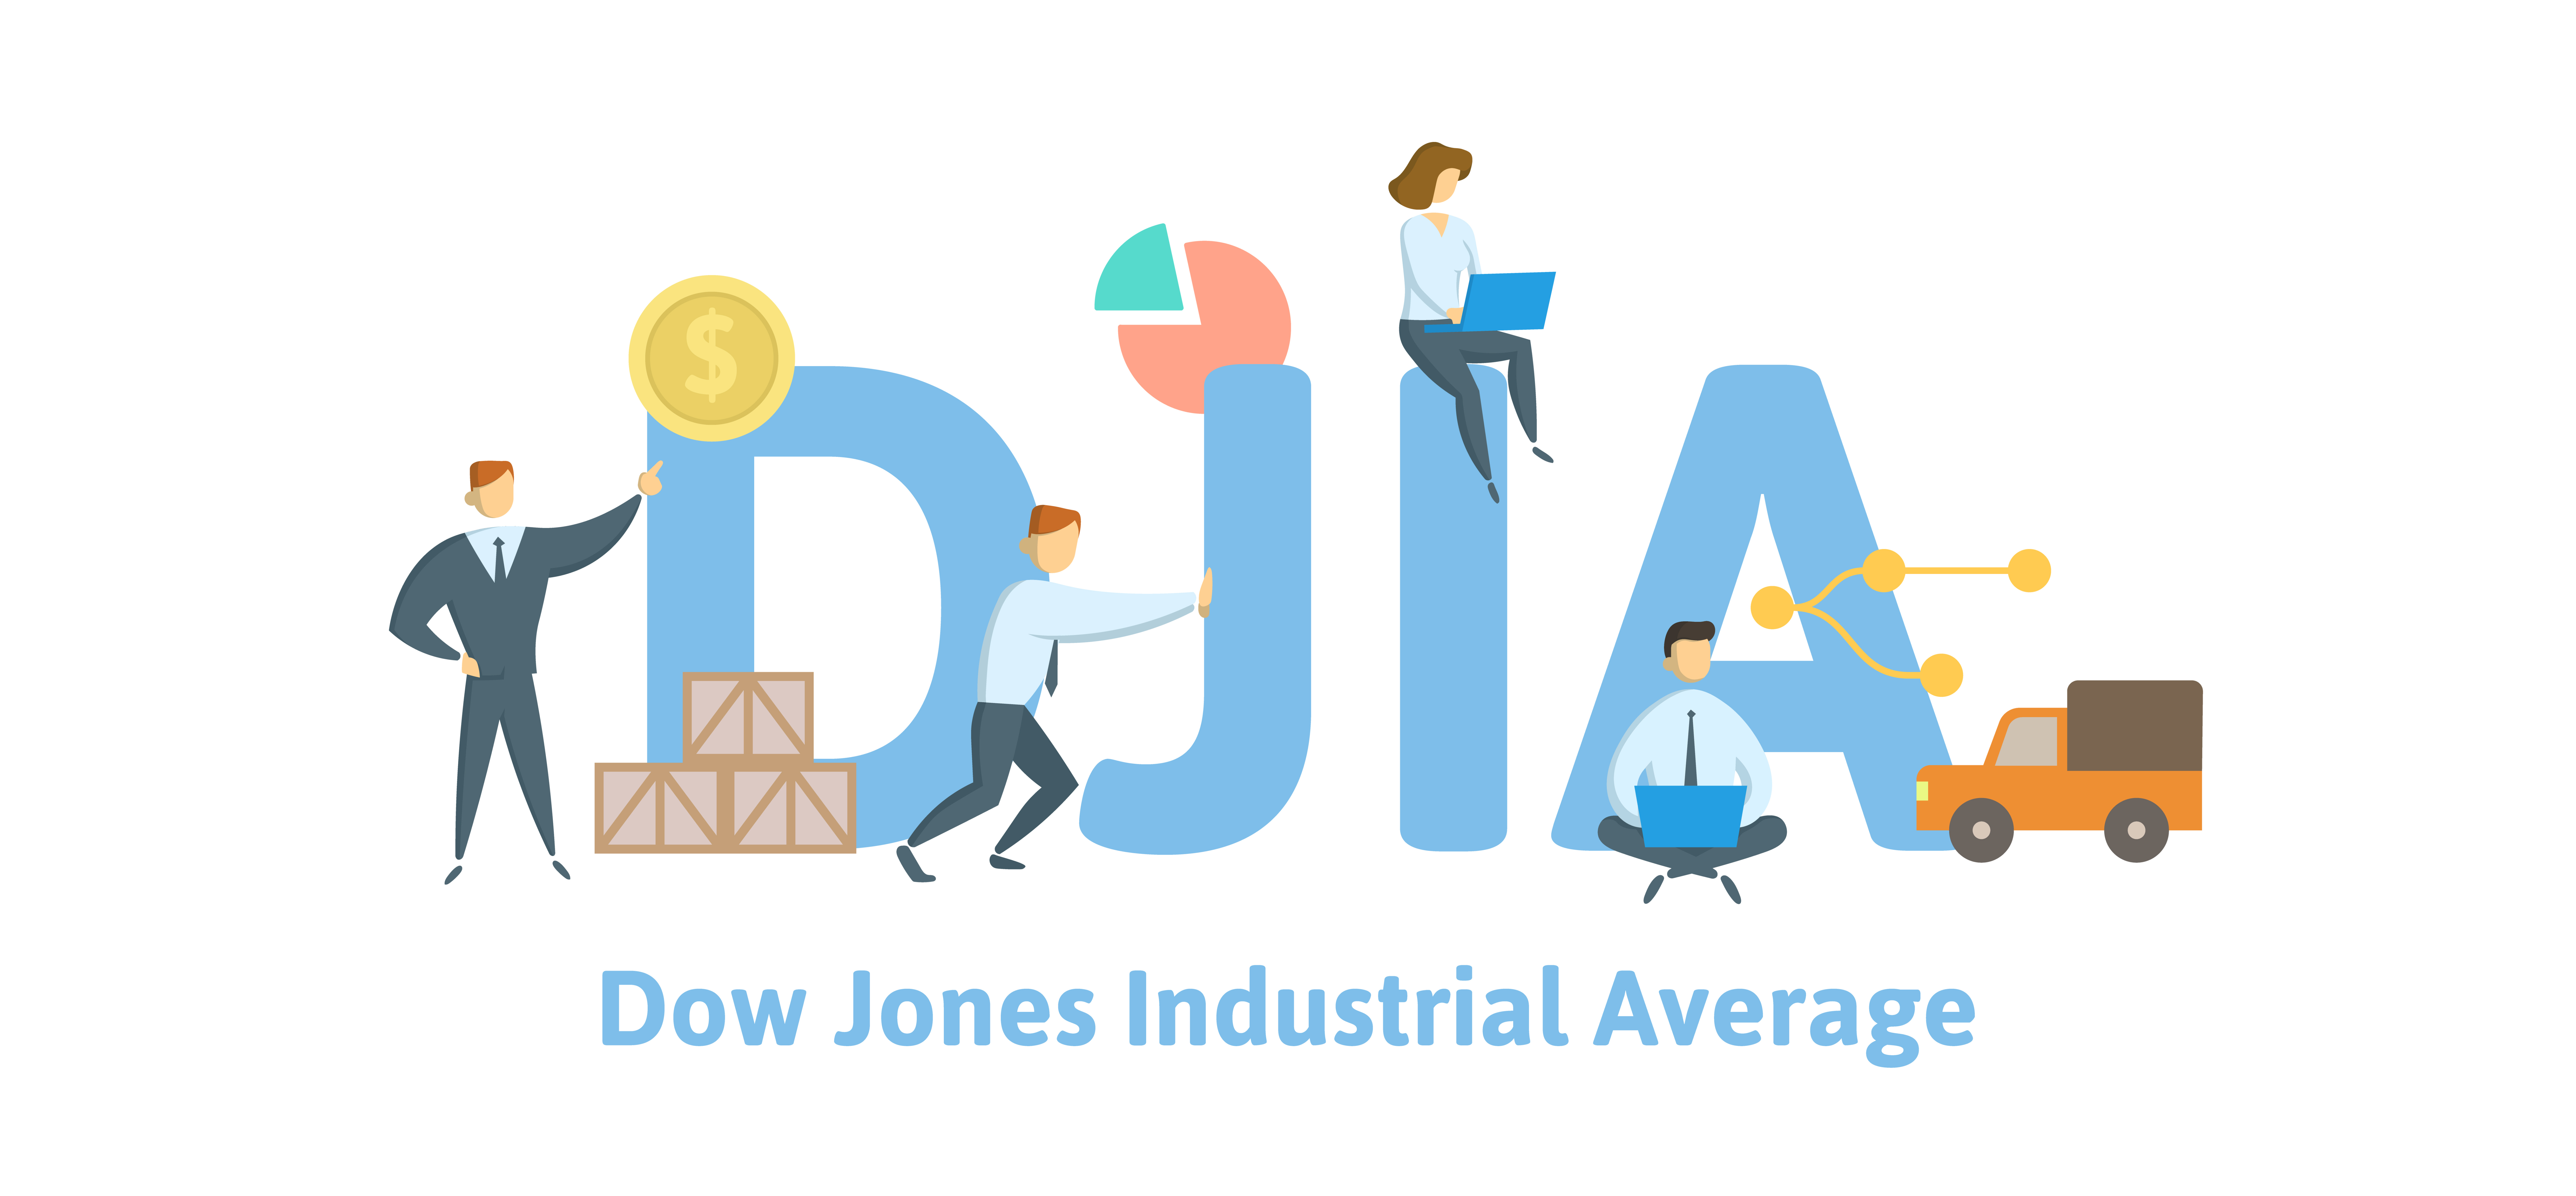 DJIA, dow jones industrial average. Concept with keywords, letters and icons. Flat vector illustration. Isolated on white background.